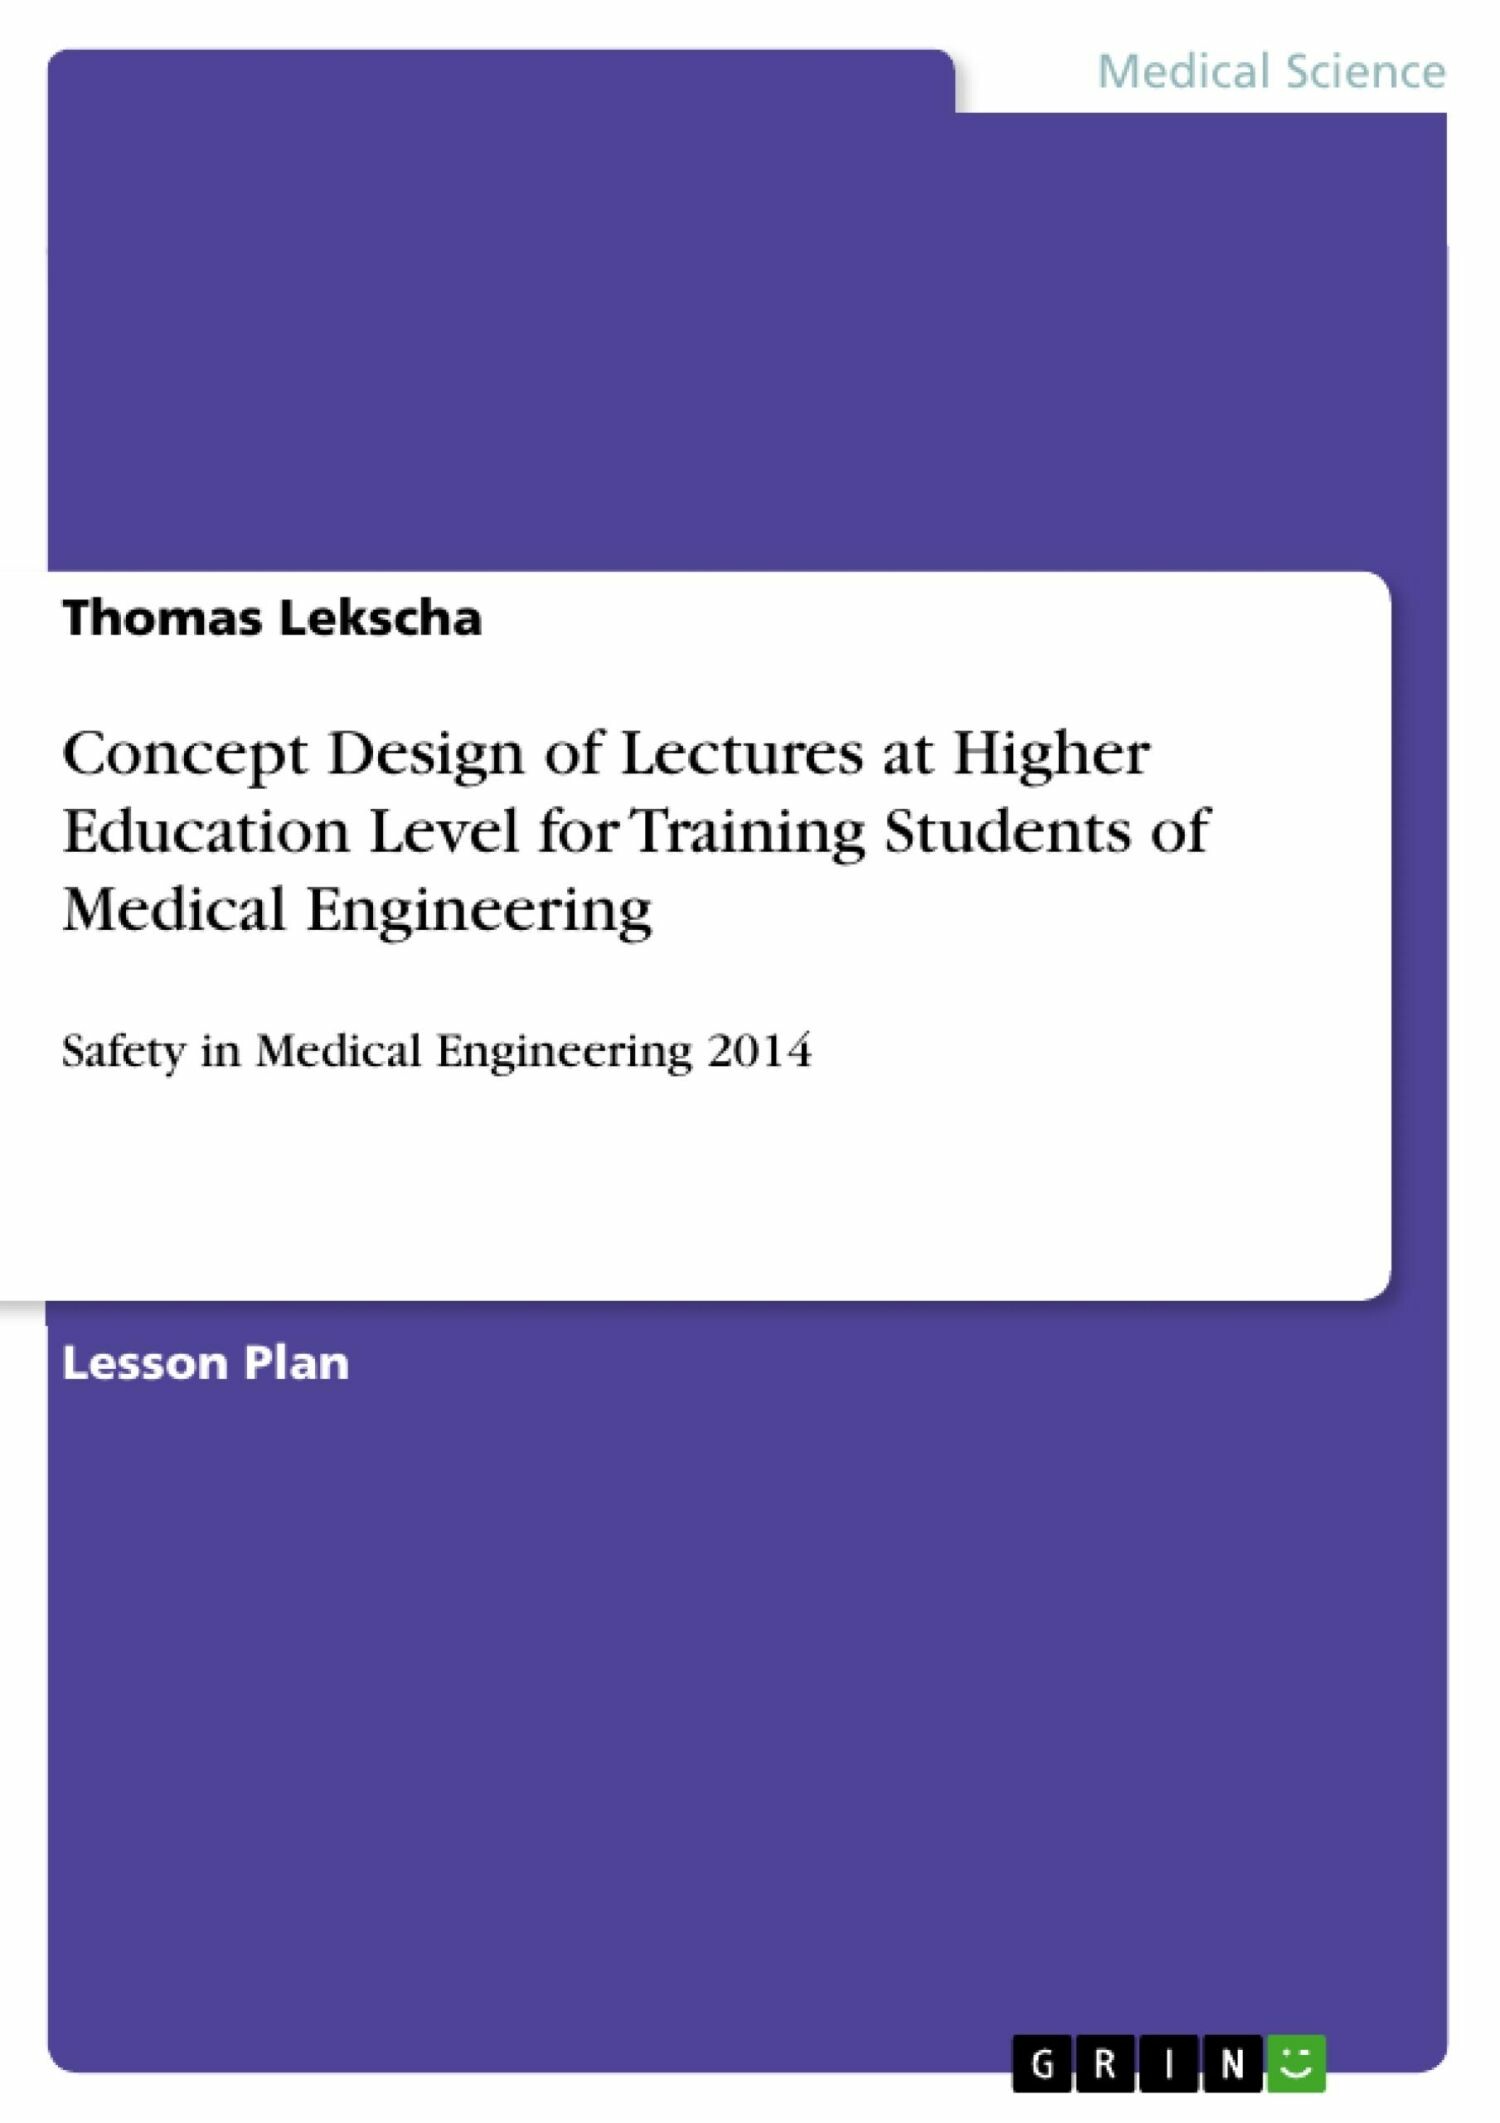 Concept Design of Lectures at Higher Education Level for Training Students of Medical Engineering